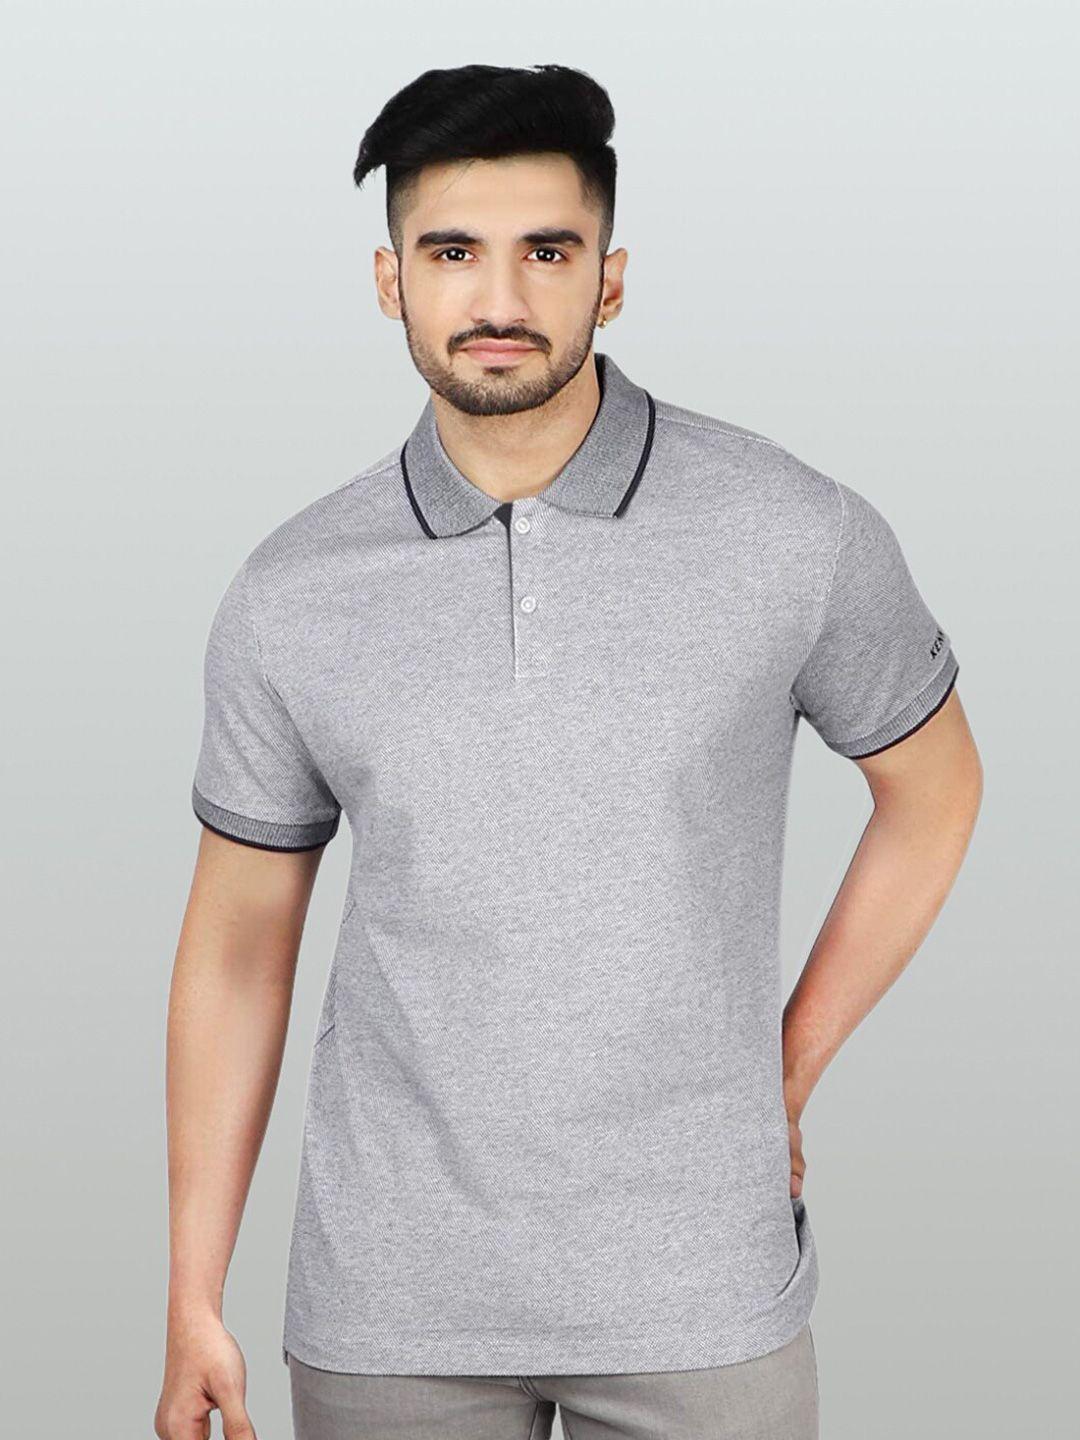 kenneth-cole-men-polo-collar-pockets-slim-fit-t-shirt